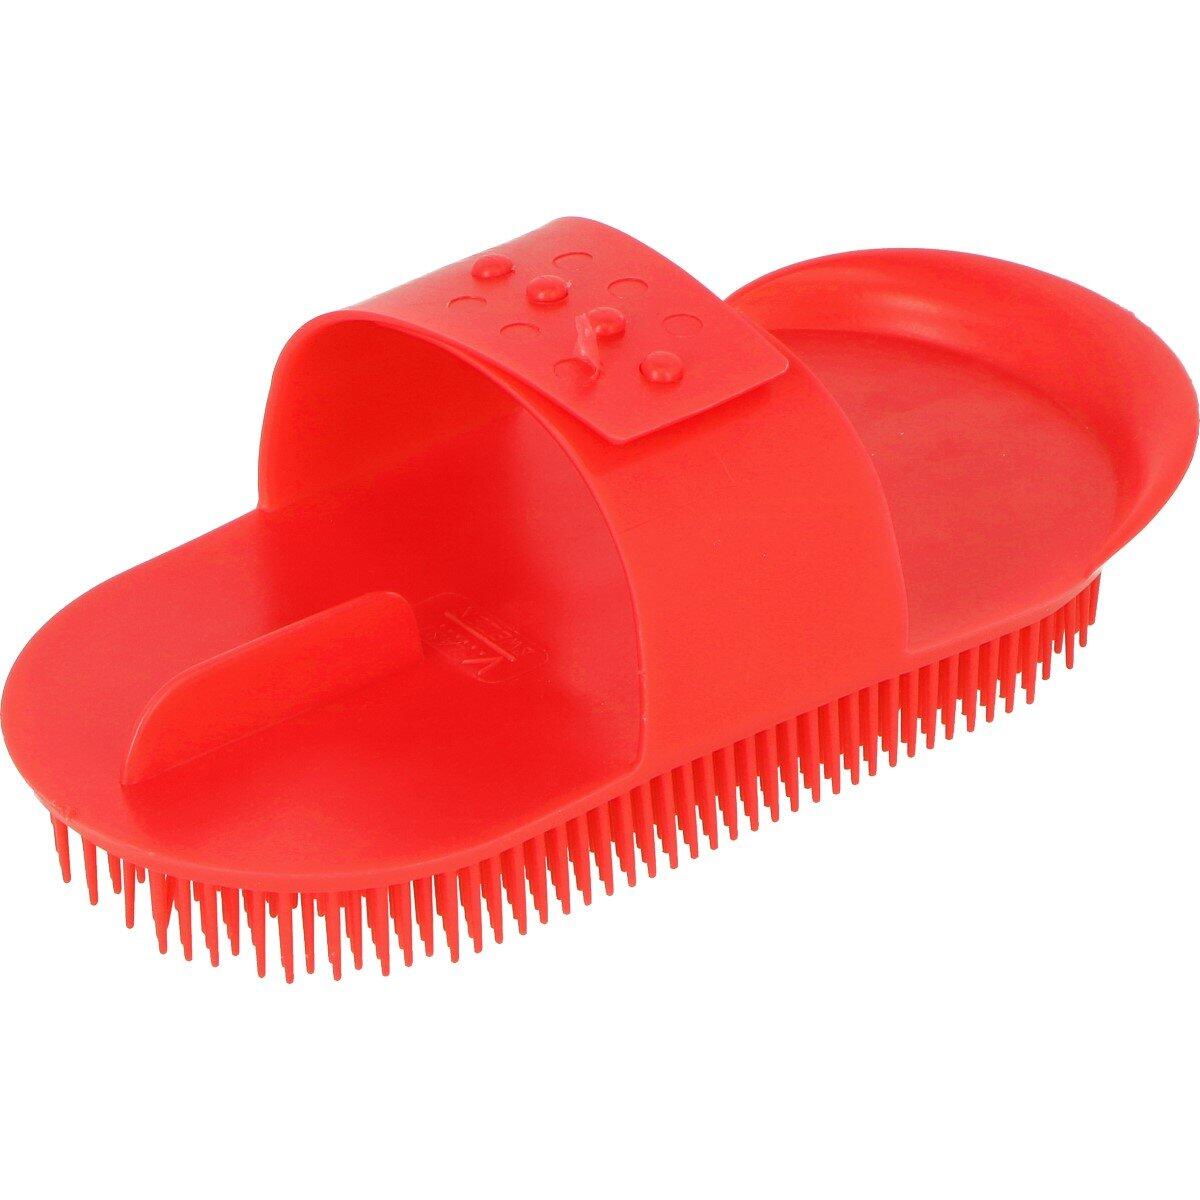 SHIRES Plastic Horse Curry Comb (Red)